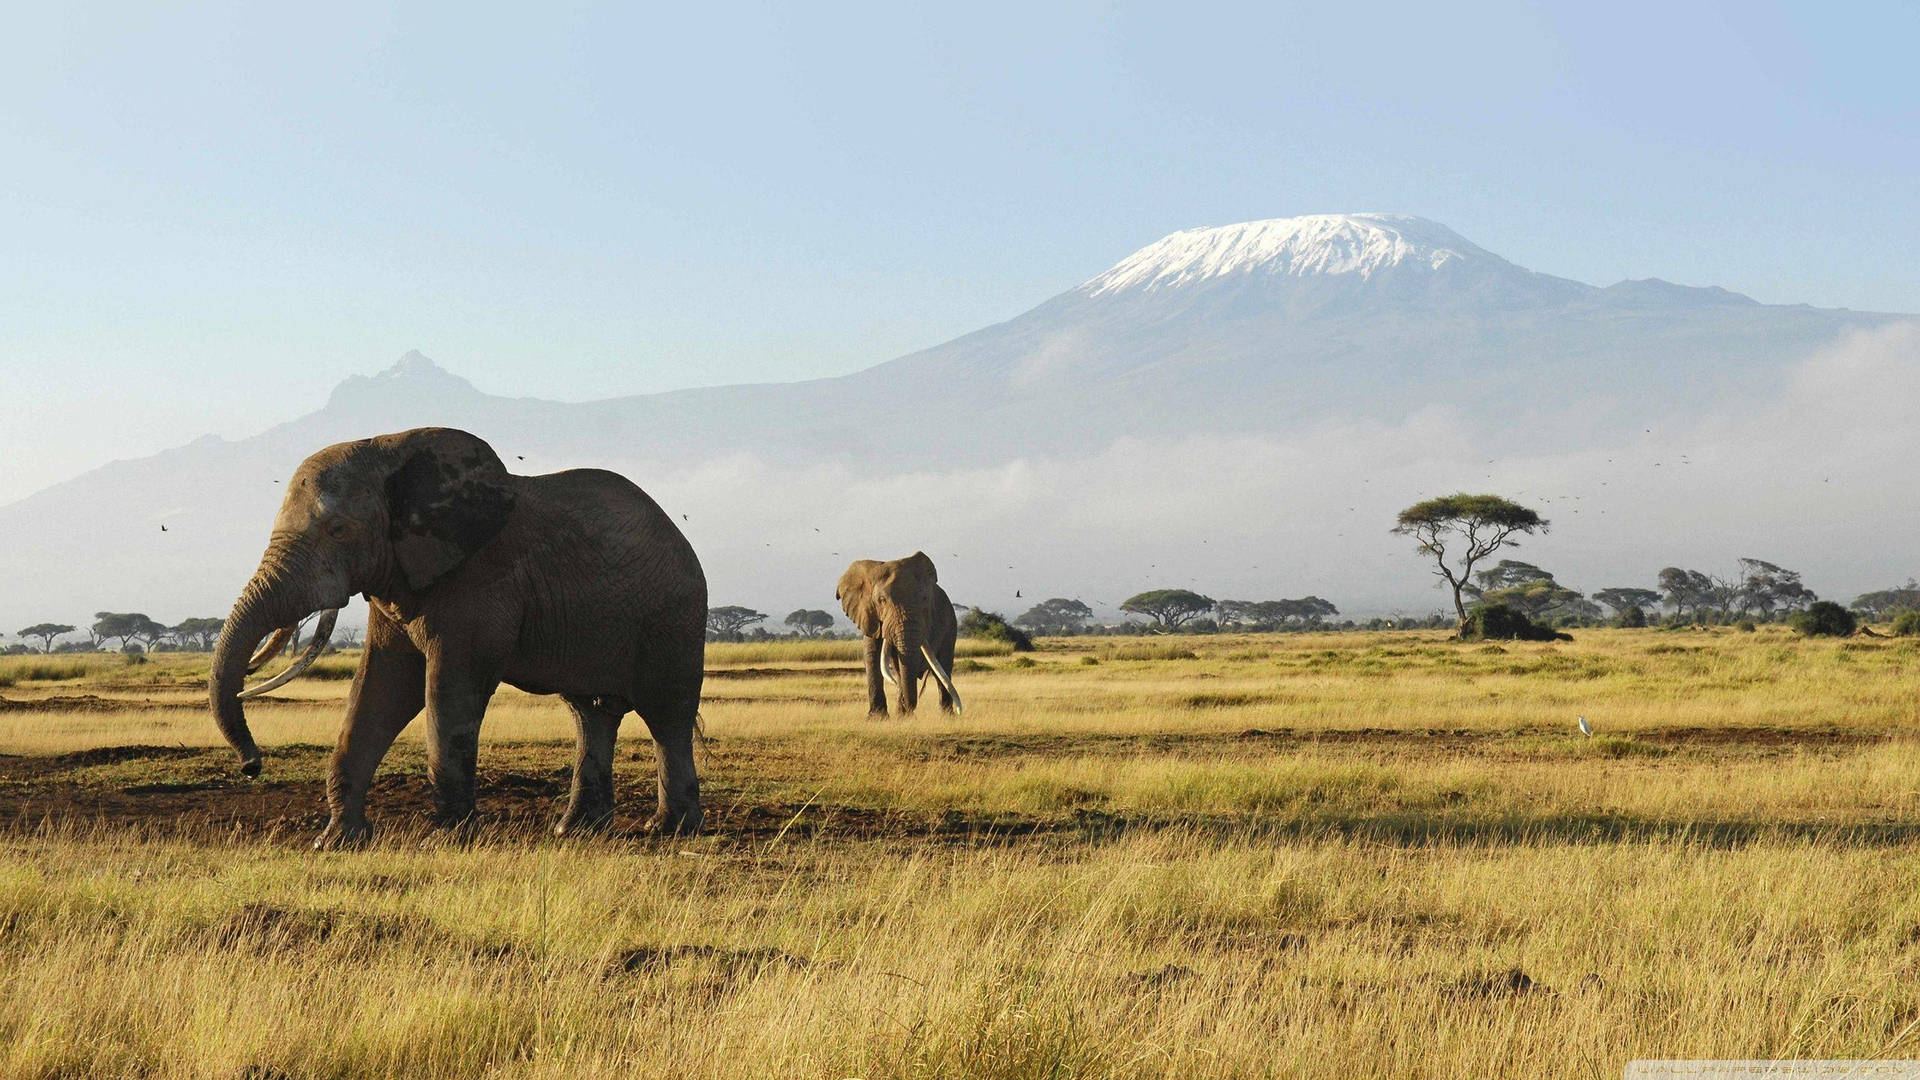 Elephant And Mountains In Africa Background